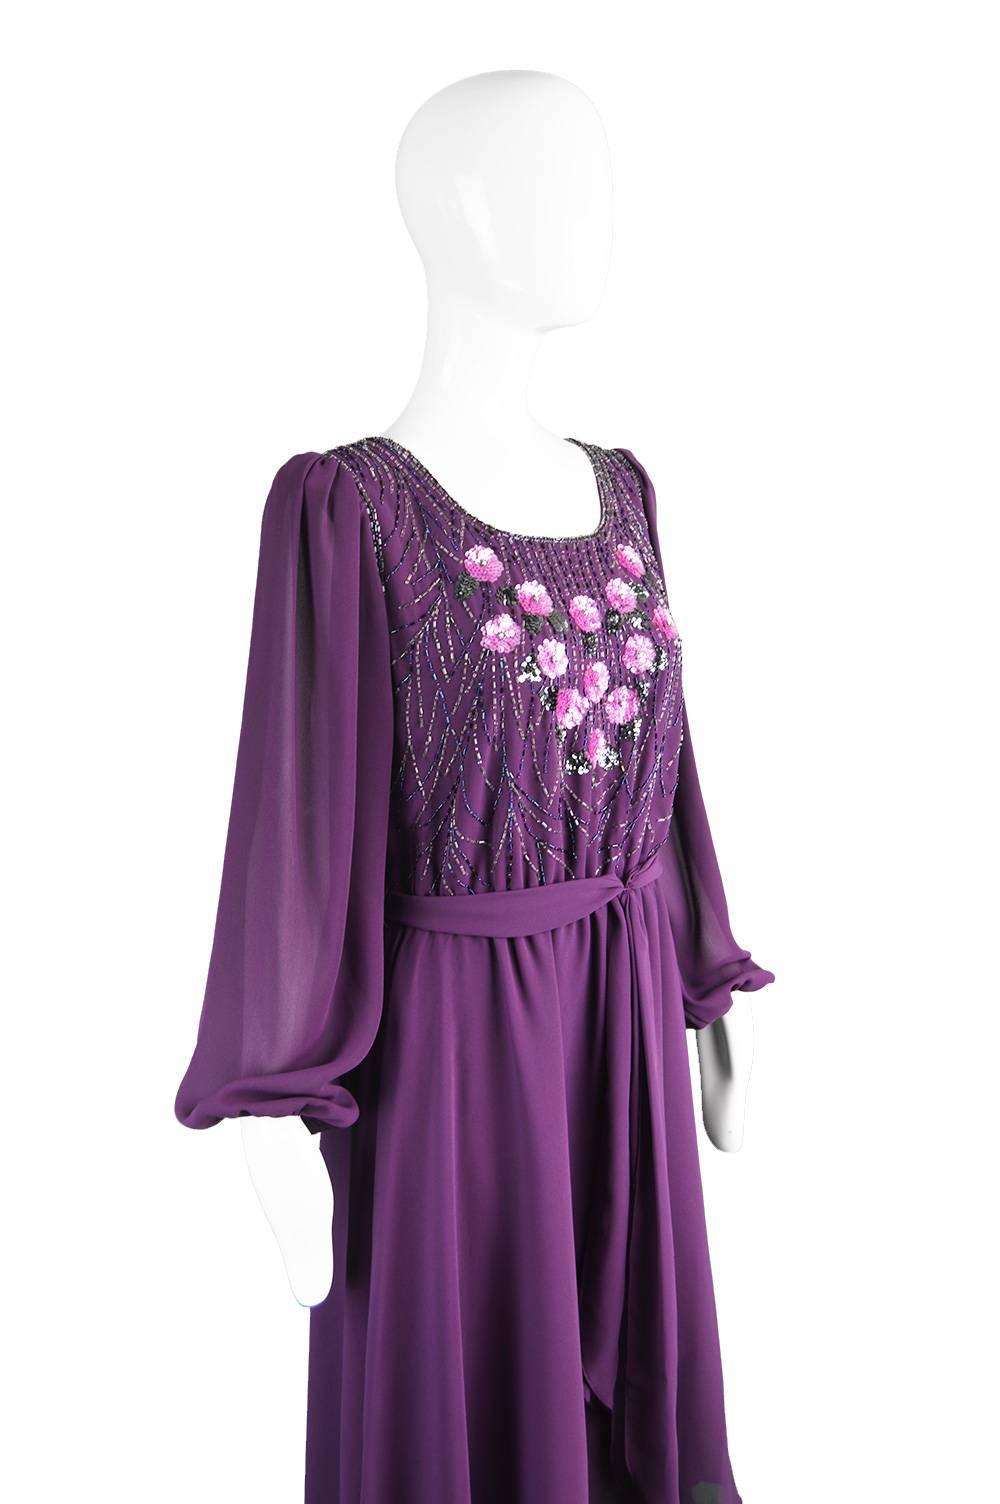 Vintage Beaded Purple Chiffon Dress by Jack Bryan, 1970s In Excellent Condition For Sale In Doncaster, South Yorkshire